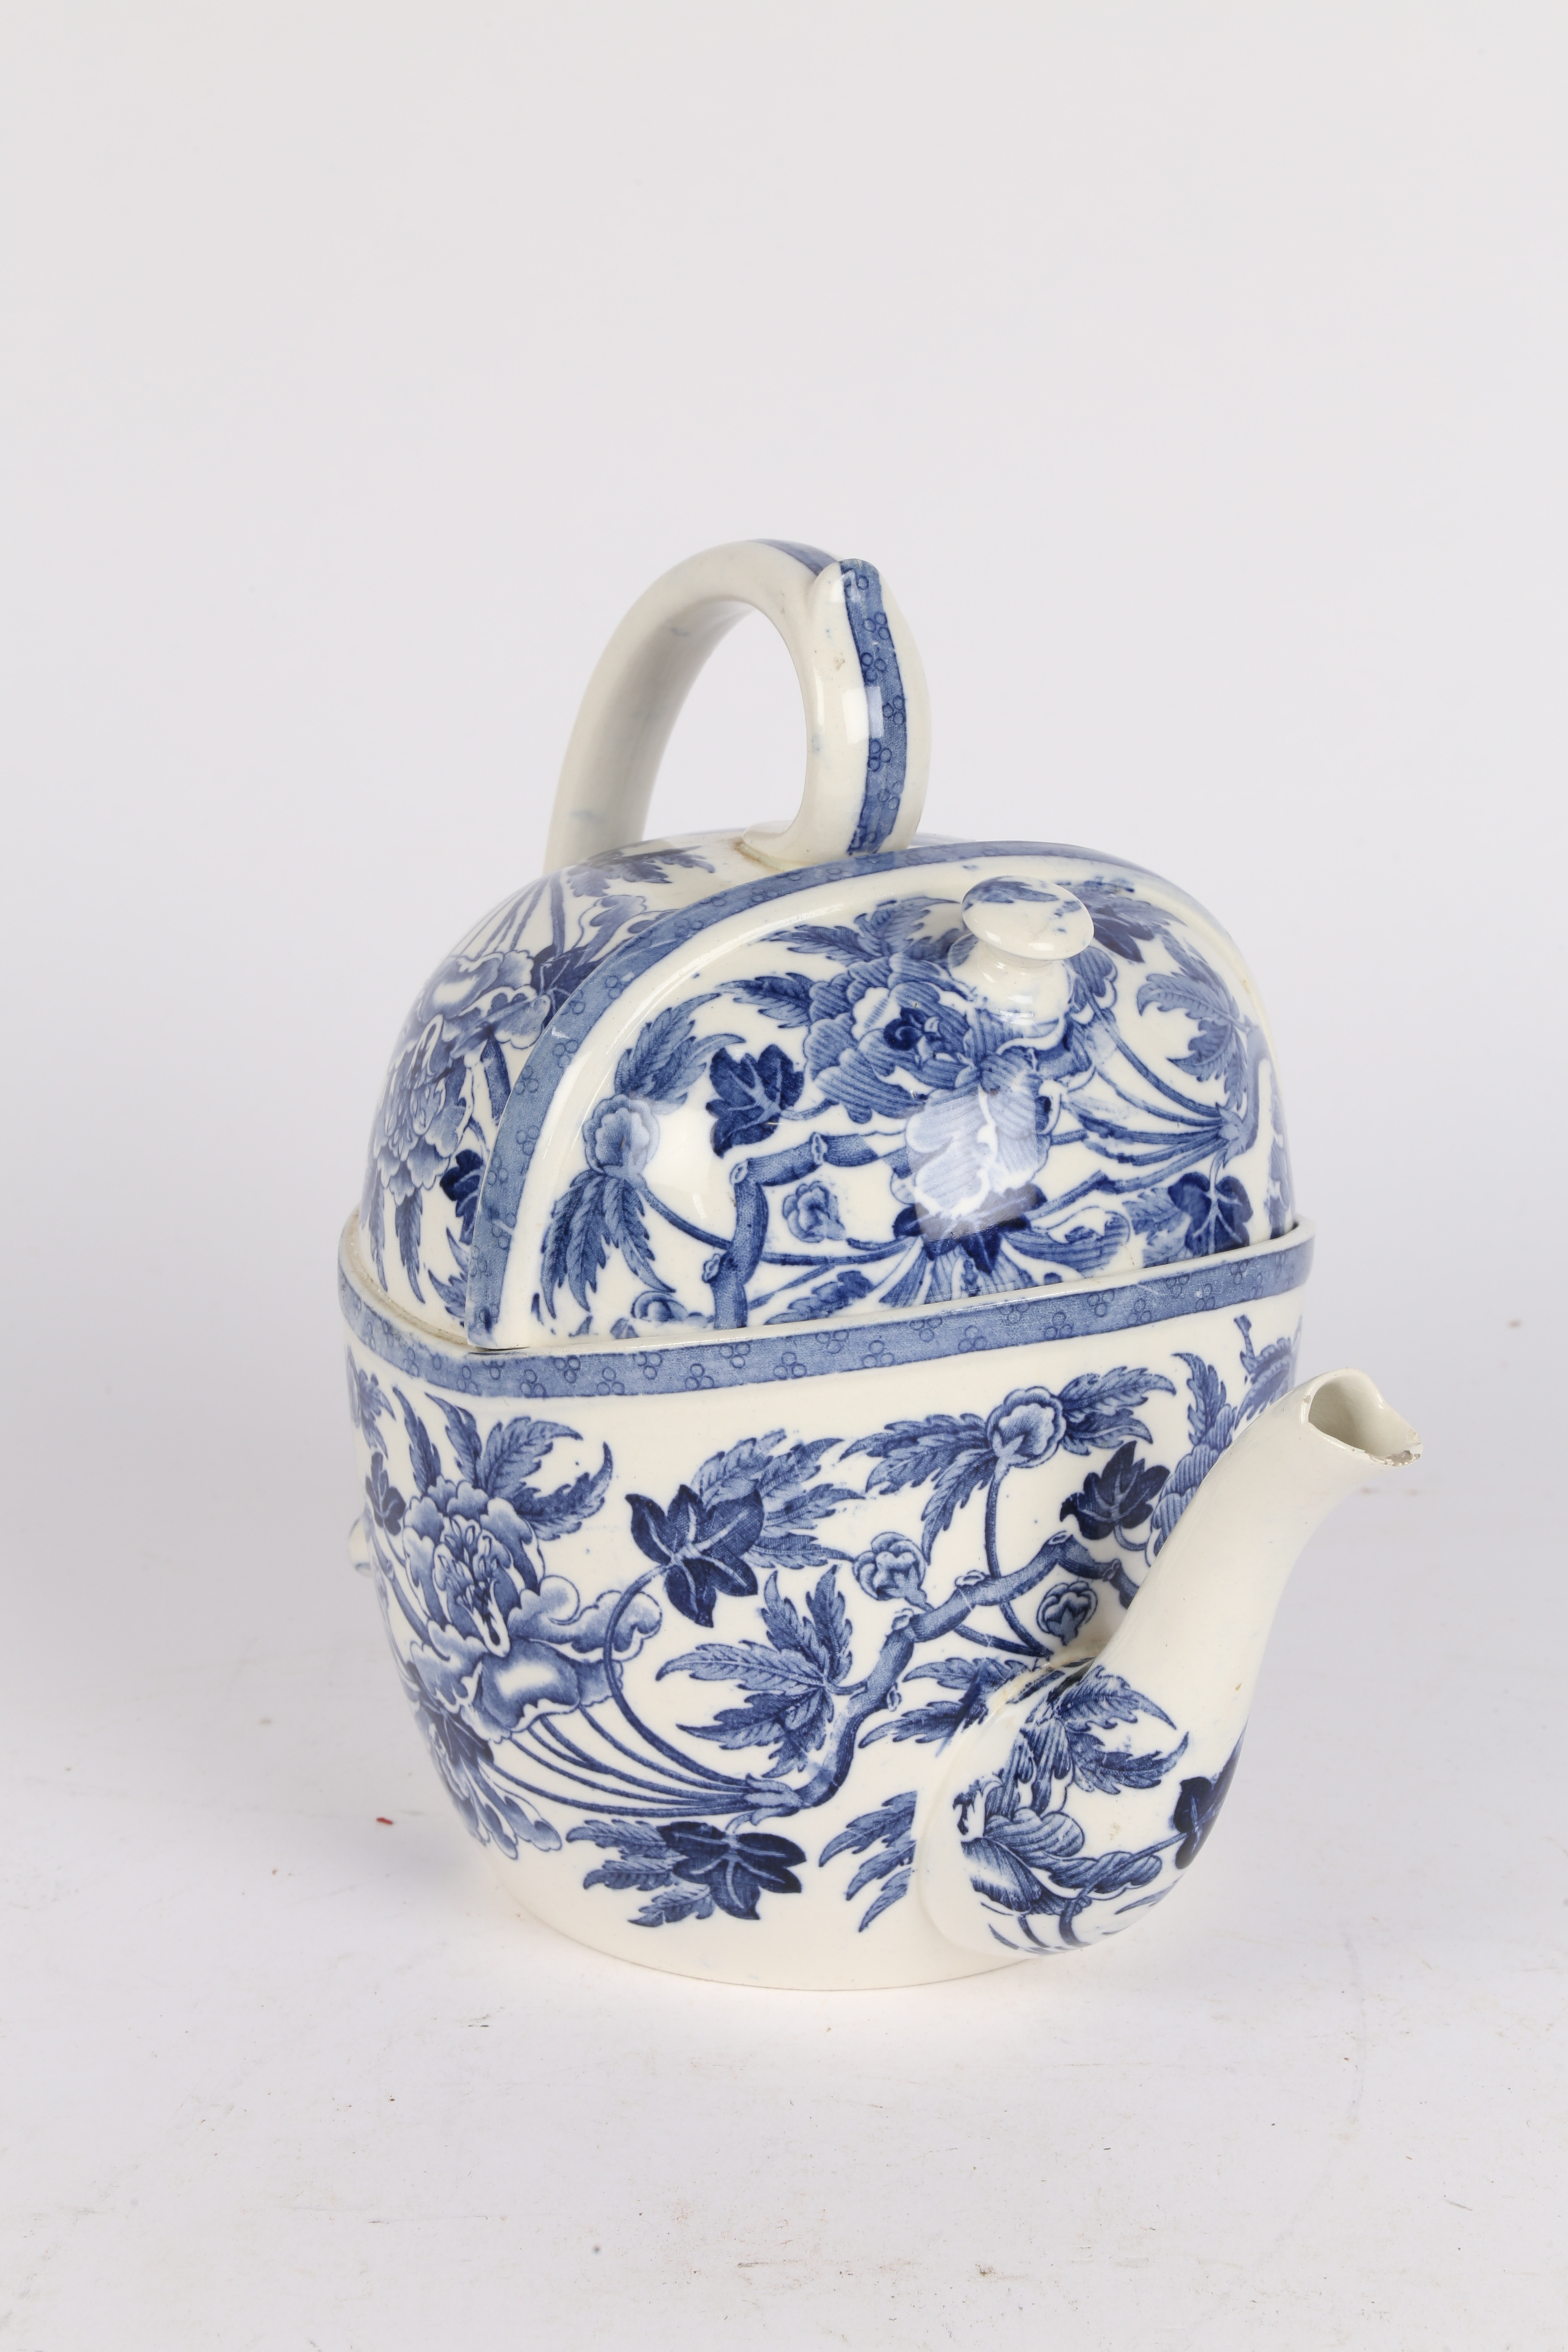 AN UNUSUAL SYP TEAPOT. - Image 7 of 10